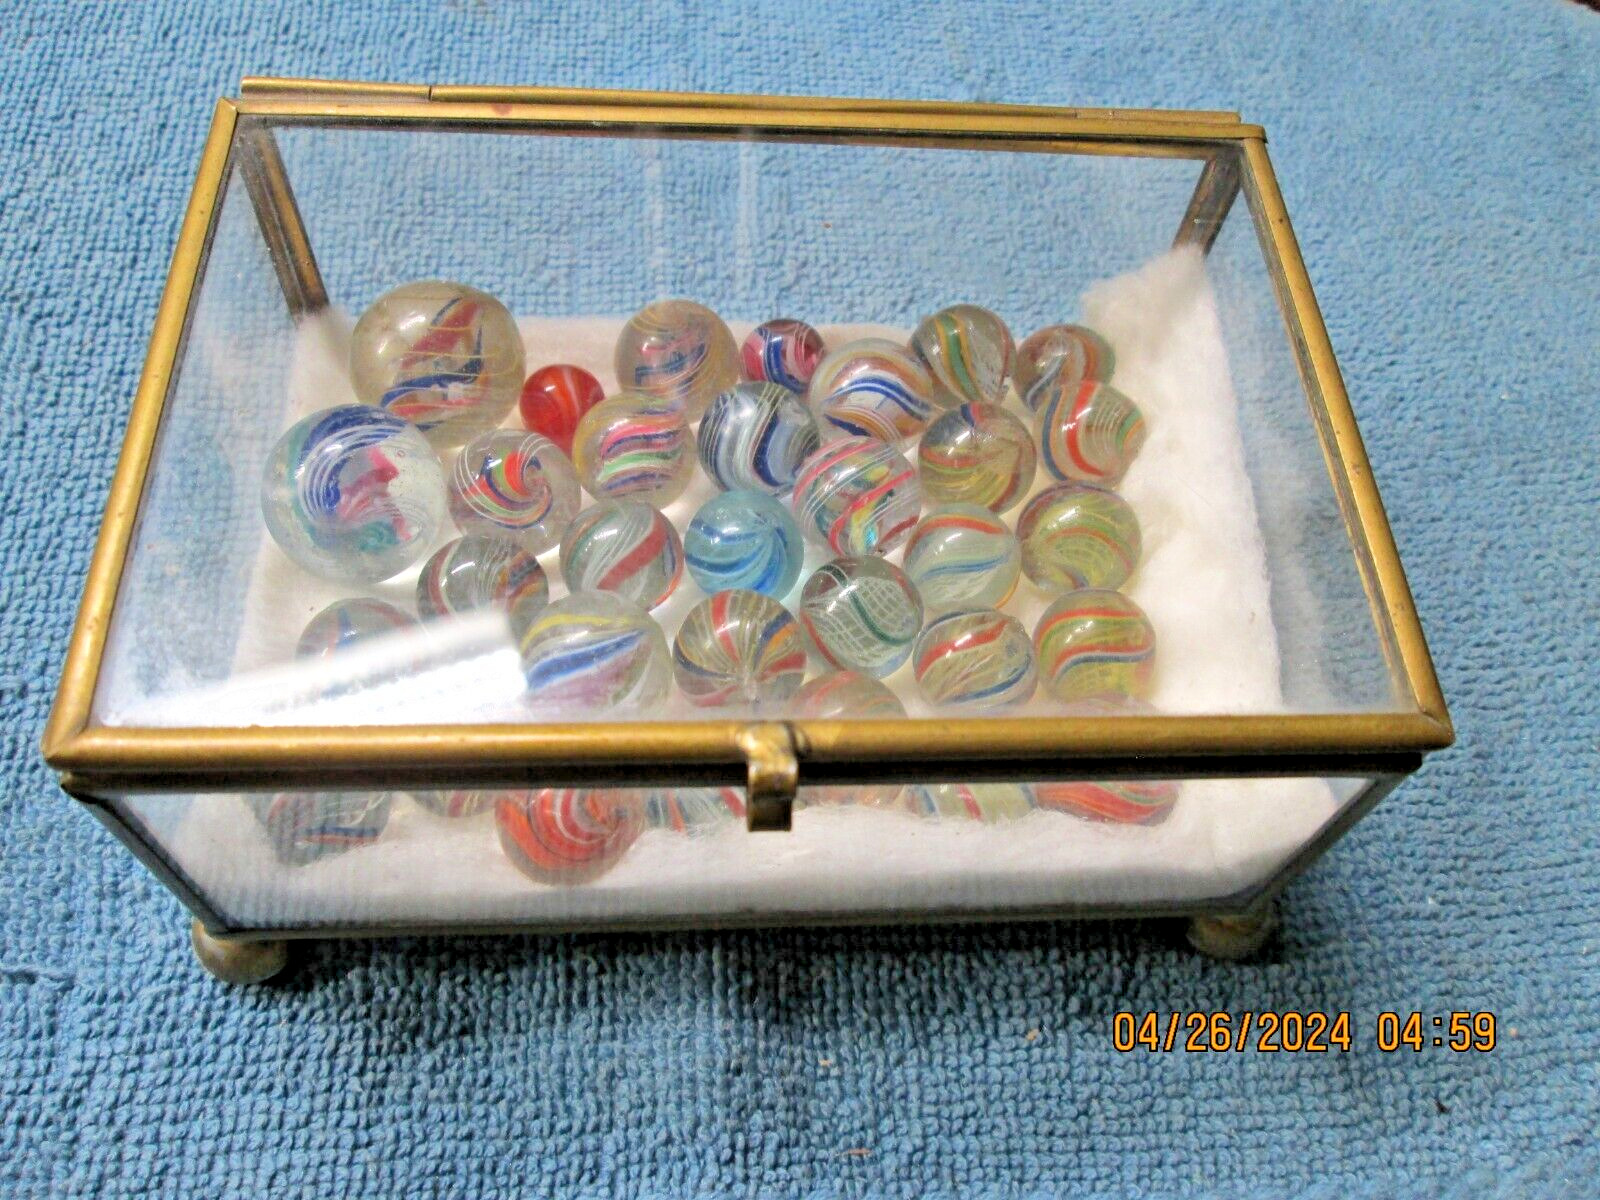 Assorted Patterns and Sizes of Antique Handmade Swirl Marbles - Glass Box